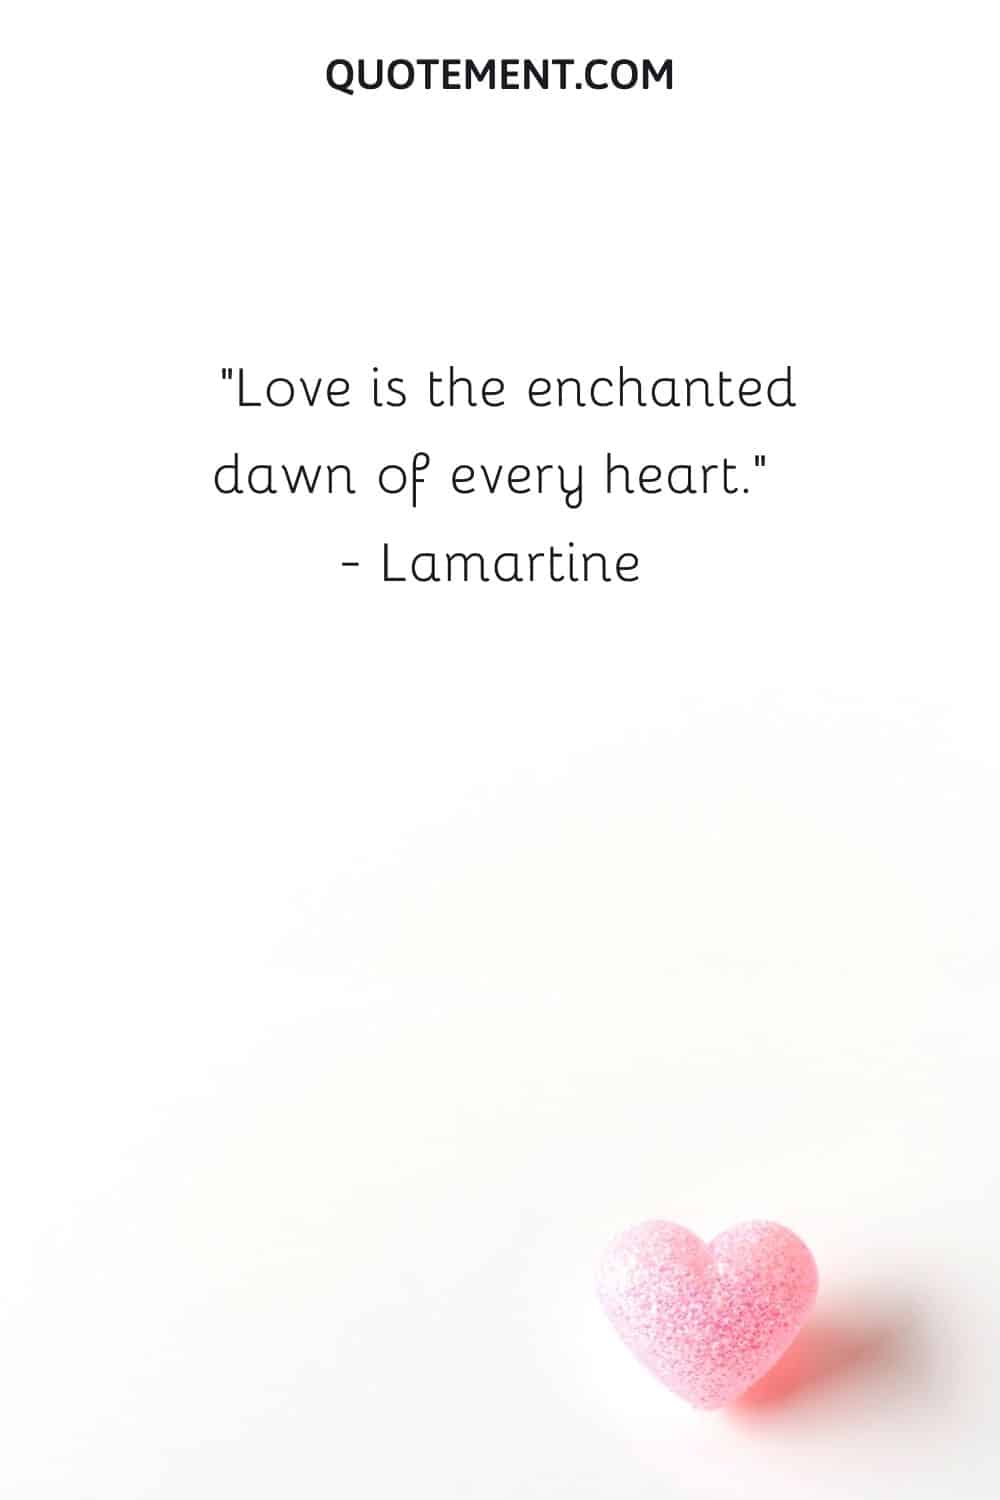 Love is the enchanted dawn of every heart.